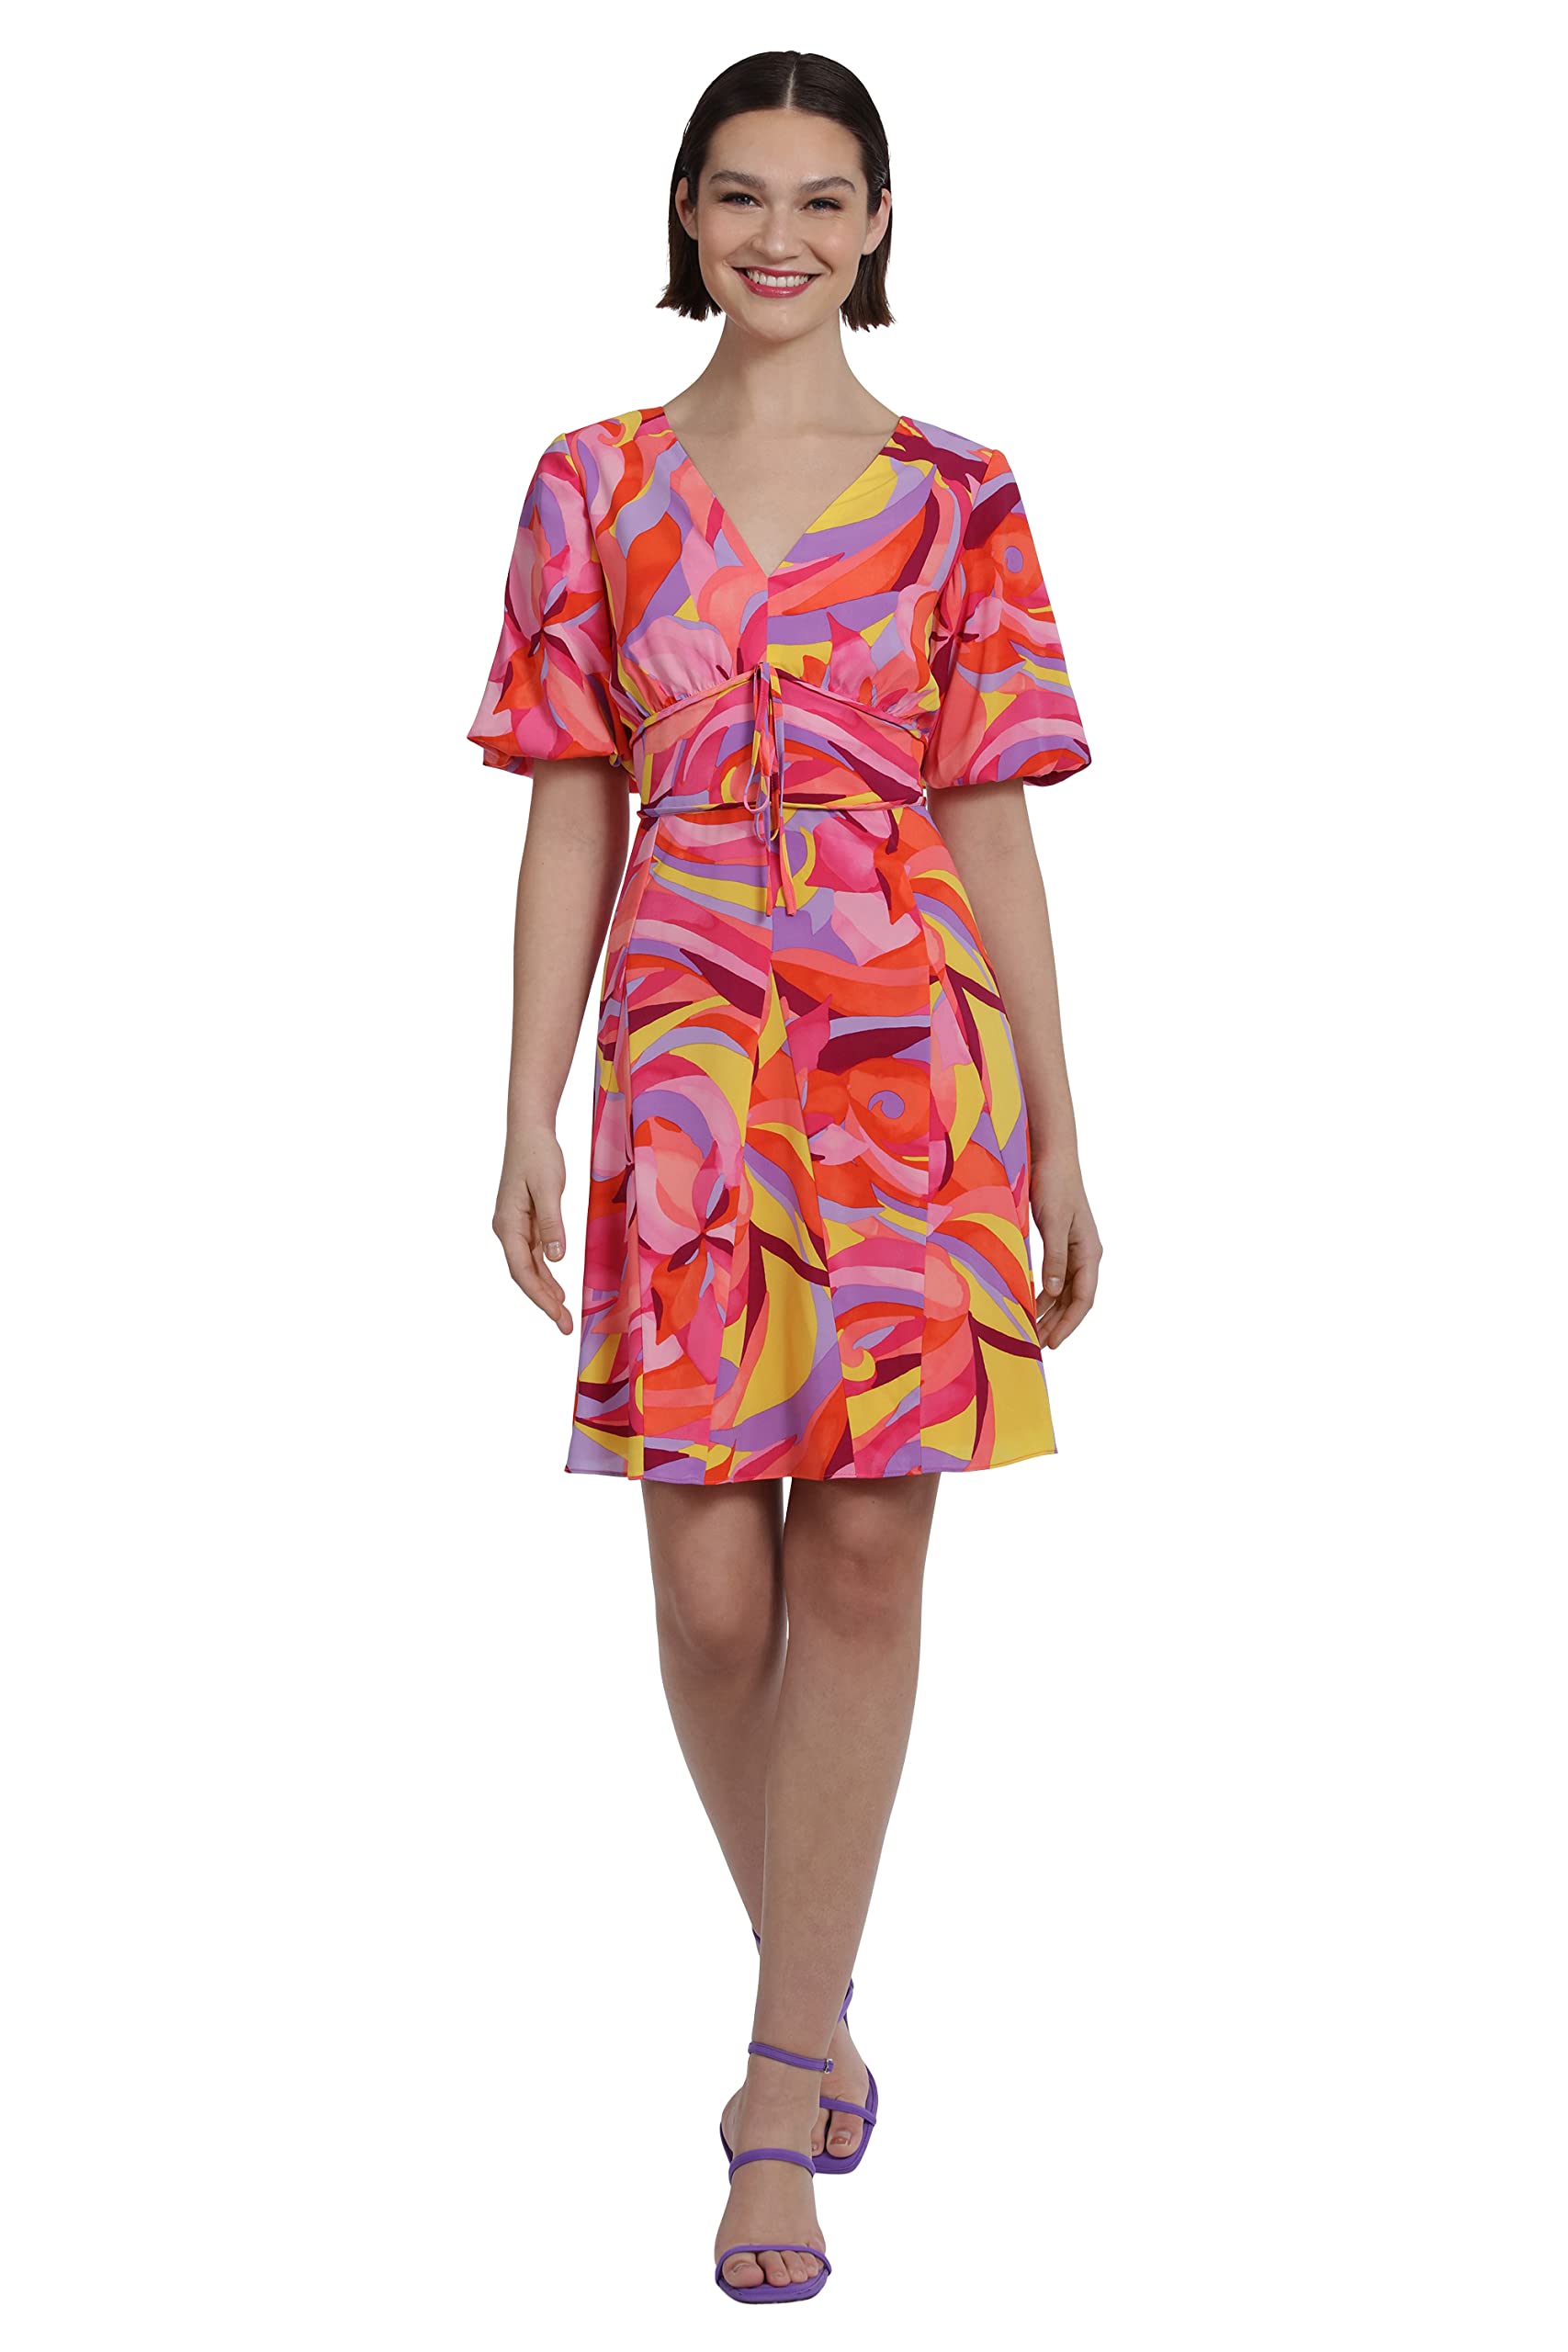 Donna Morgan Women's Fun Print Colorful Dress Dressy Casual Day Event Party Date